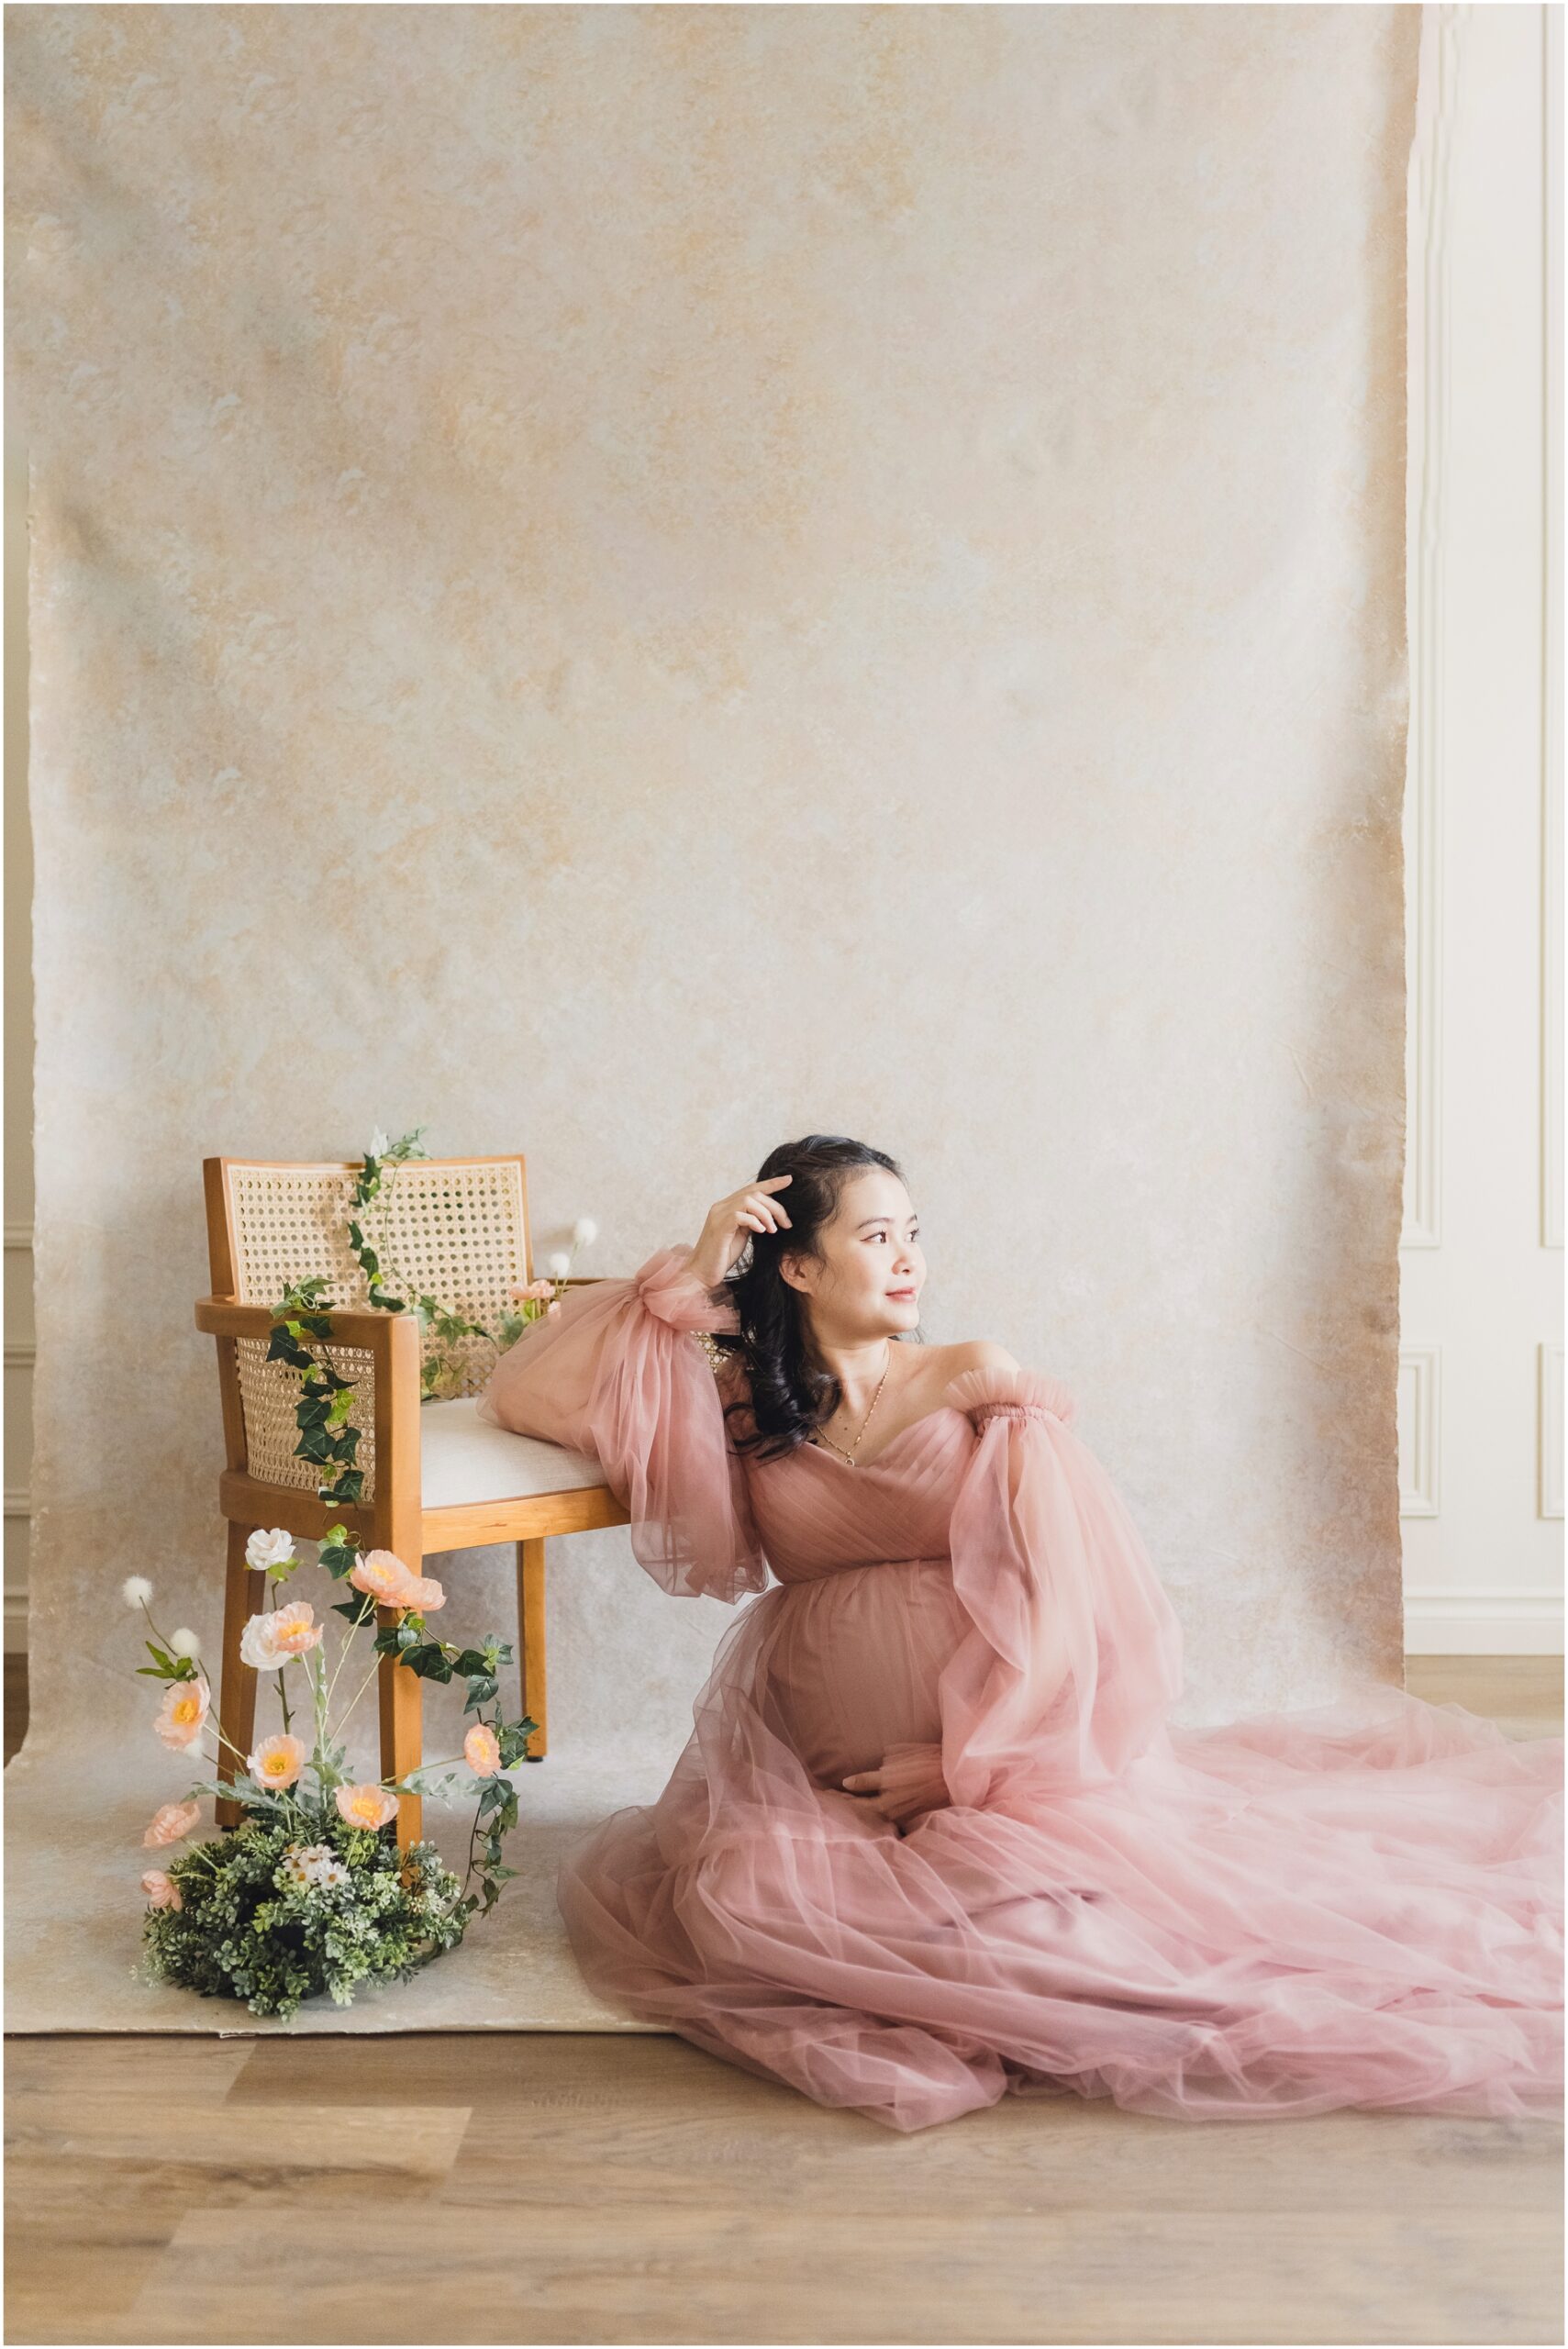 A woman at her Maternity Session in Vancouver Washington looks into the light as she leans on a chair covered in flowers